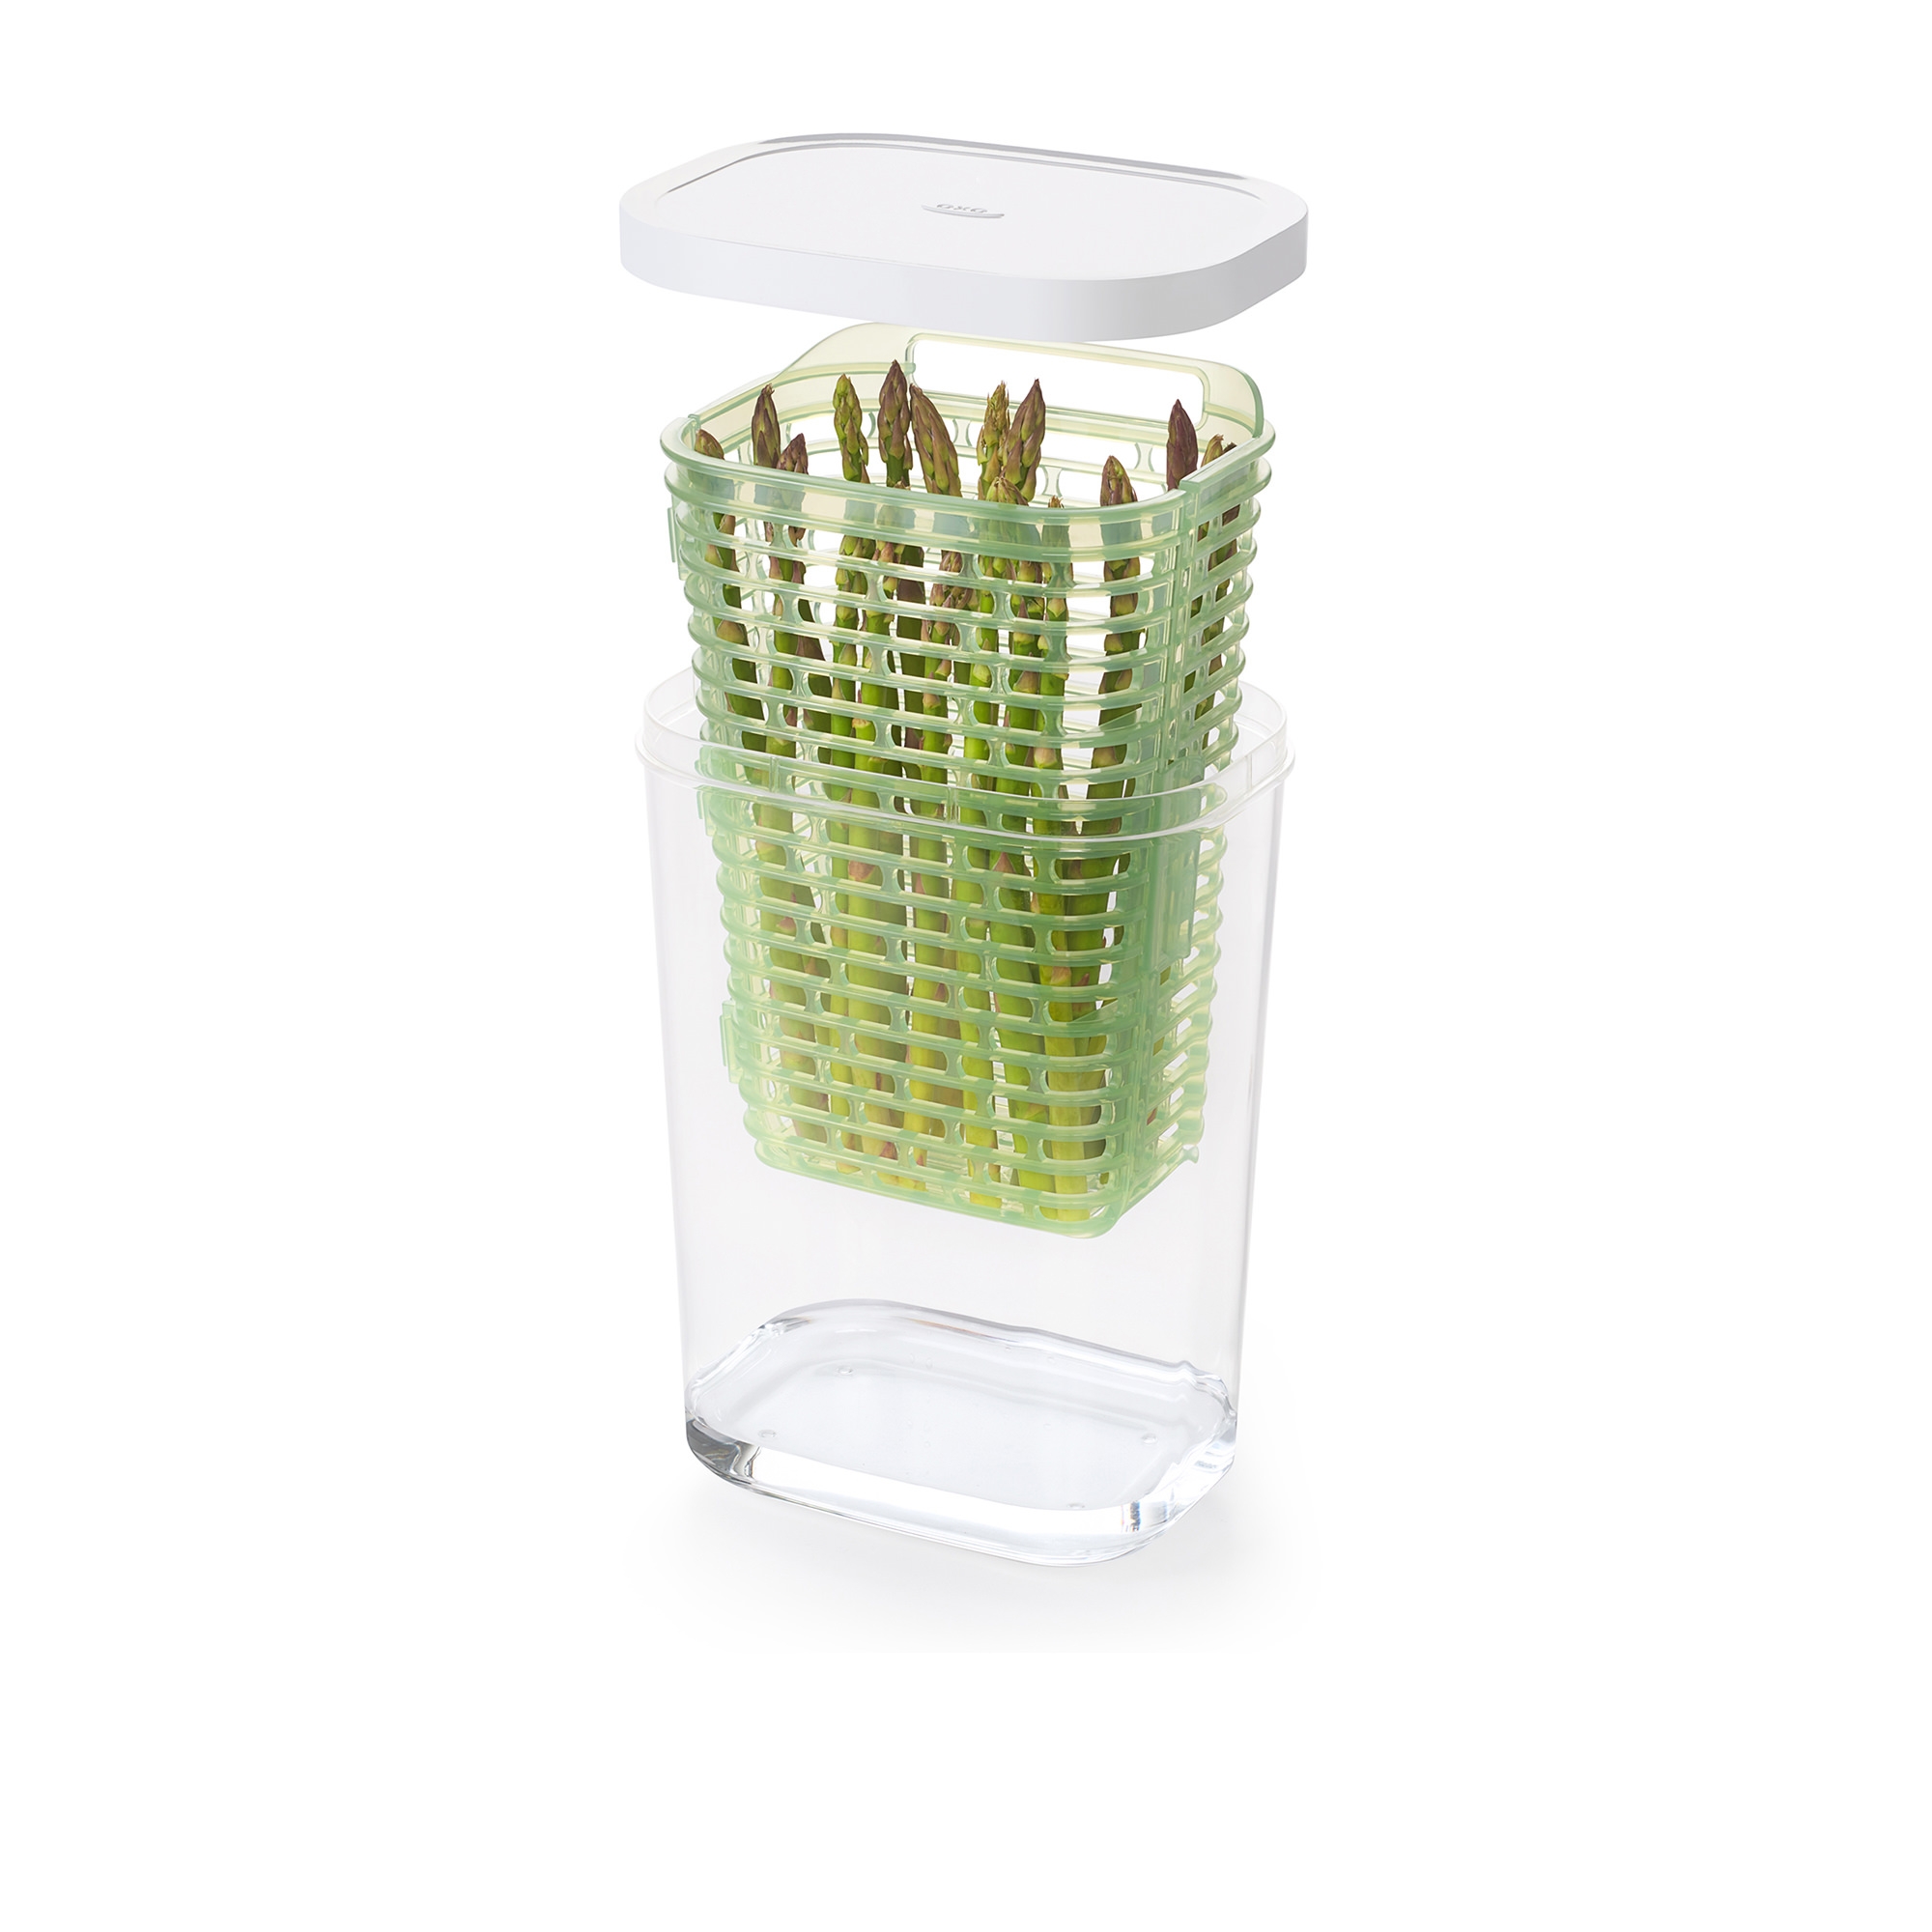 OXO Good Grips GreenSaver Herb Keeper 2.6L Image 2